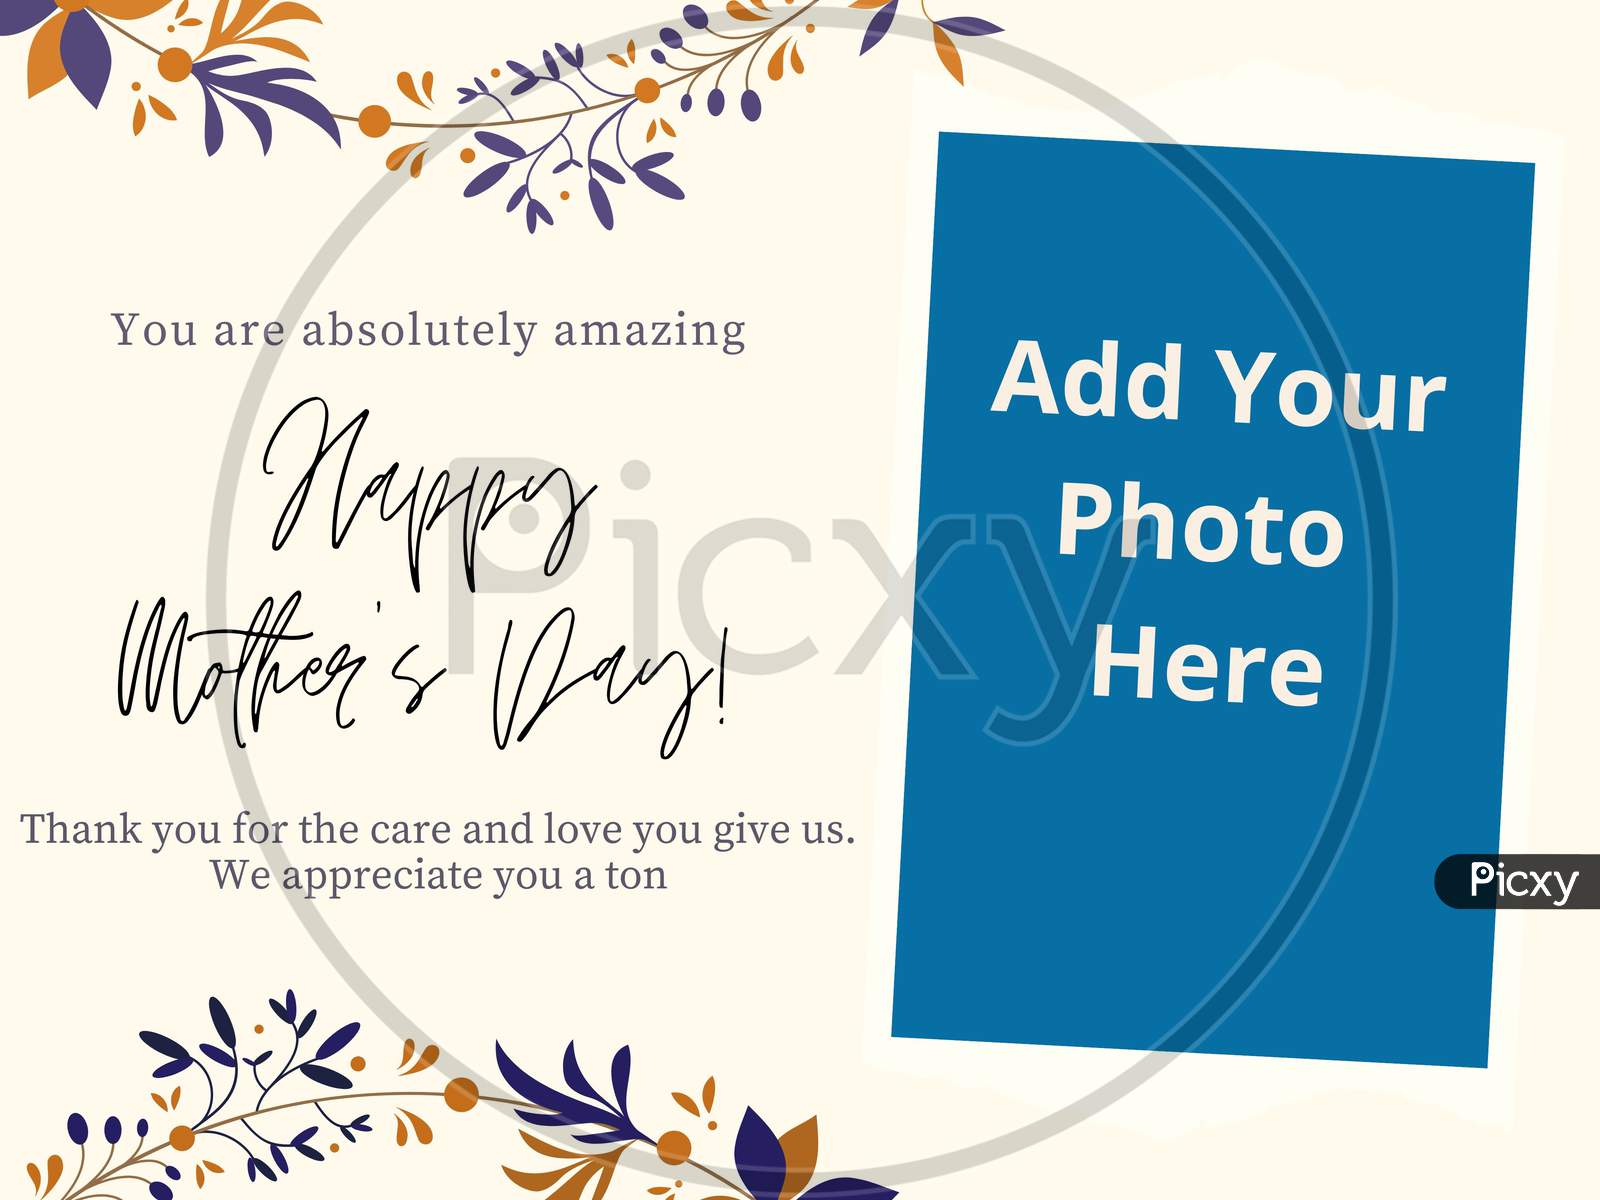 Mother's Day Greeting Card With Add your Photo Option